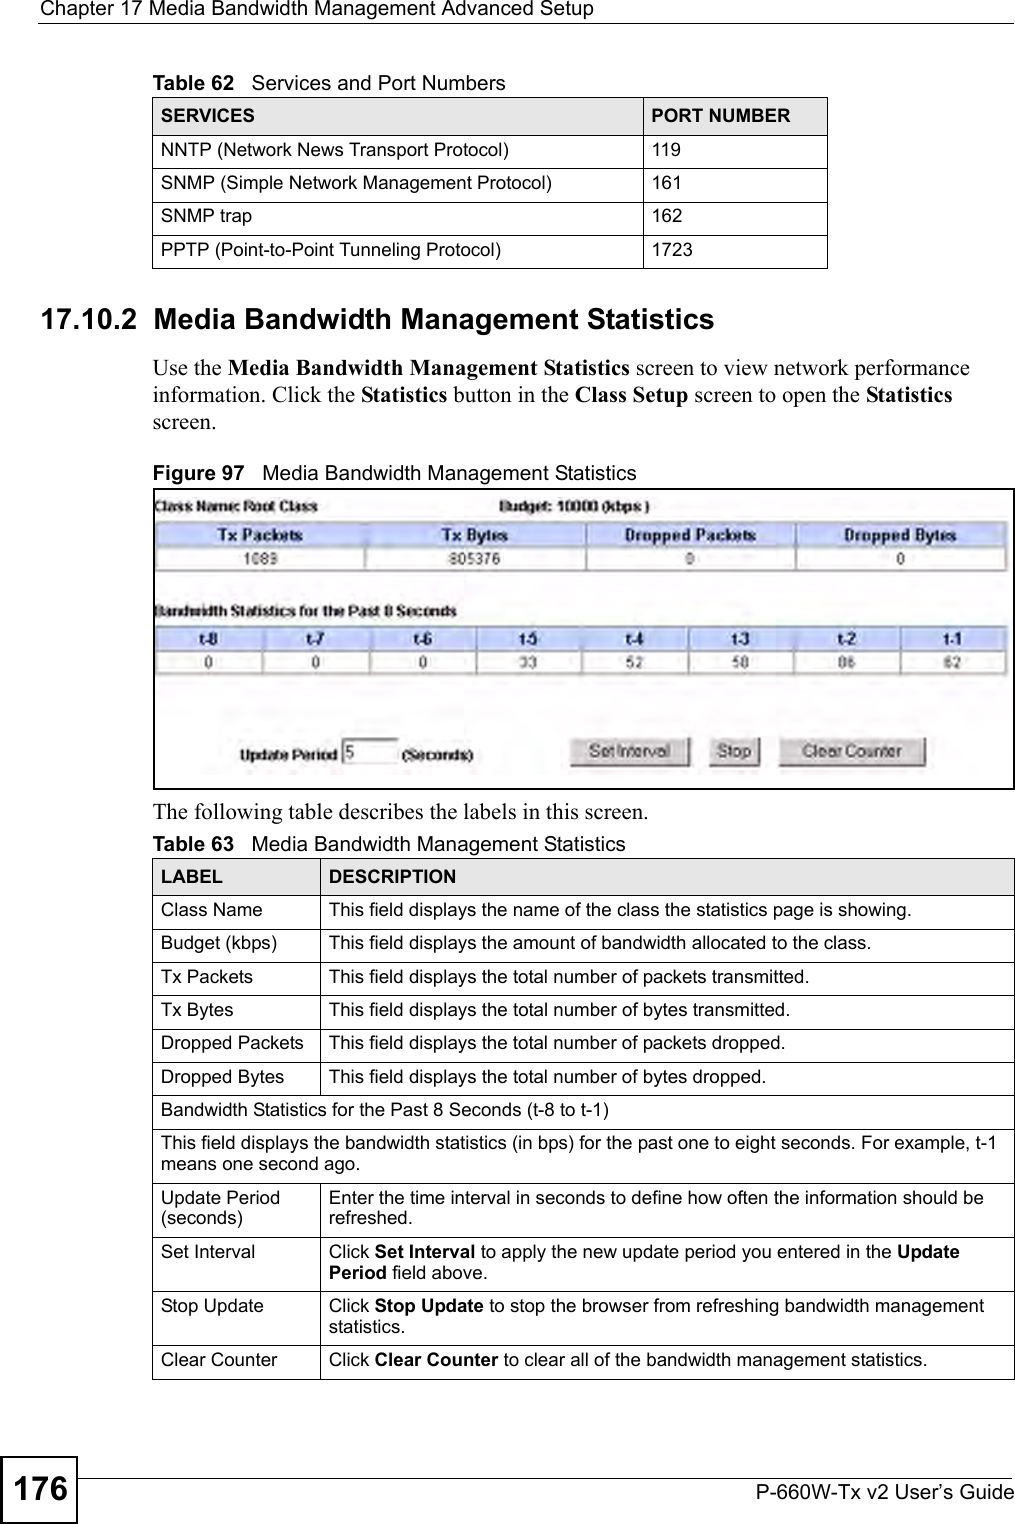 Chapter 17 Media Bandwidth Management Advanced SetupP-660W-Tx v2 User’s Guide17617.10.2  Media Bandwidth Management Statistics Use the Media Bandwidth Management Statistics screen to view network performance information. Click the Statistics button in the Class Setup screen to open the Statistics screen.Figure 97   Media Bandwidth Management Statistics The following table describes the labels in this screen.NNTP (Network News Transport Protocol) 119SNMP (Simple Network Management Protocol) 161SNMP trap 162PPTP (Point-to-Point Tunneling Protocol) 1723Table 62   Services and Port NumbersSERVICES PORT NUMBERTable 63   Media Bandwidth Management StatisticsLABEL DESCRIPTIONClass Name This field displays the name of the class the statistics page is showing. Budget (kbps) This field displays the amount of bandwidth allocated to the class. Tx Packets This field displays the total number of packets transmitted. Tx Bytes This field displays the total number of bytes transmitted. Dropped Packets This field displays the total number of packets dropped. Dropped Bytes This field displays the total number of bytes dropped. Bandwidth Statistics for the Past 8 Seconds (t-8 to t-1)This field displays the bandwidth statistics (in bps) for the past one to eight seconds. For example, t-1 means one second ago.Update Period (seconds)Enter the time interval in seconds to define how often the information should be refreshed. Set Interval Click Set Interval to apply the new update period you entered in the Update Period field above.Stop Update Click Stop Update to stop the browser from refreshing bandwidth management statistics.Clear Counter Click Clear Counter to clear all of the bandwidth management statistics. 